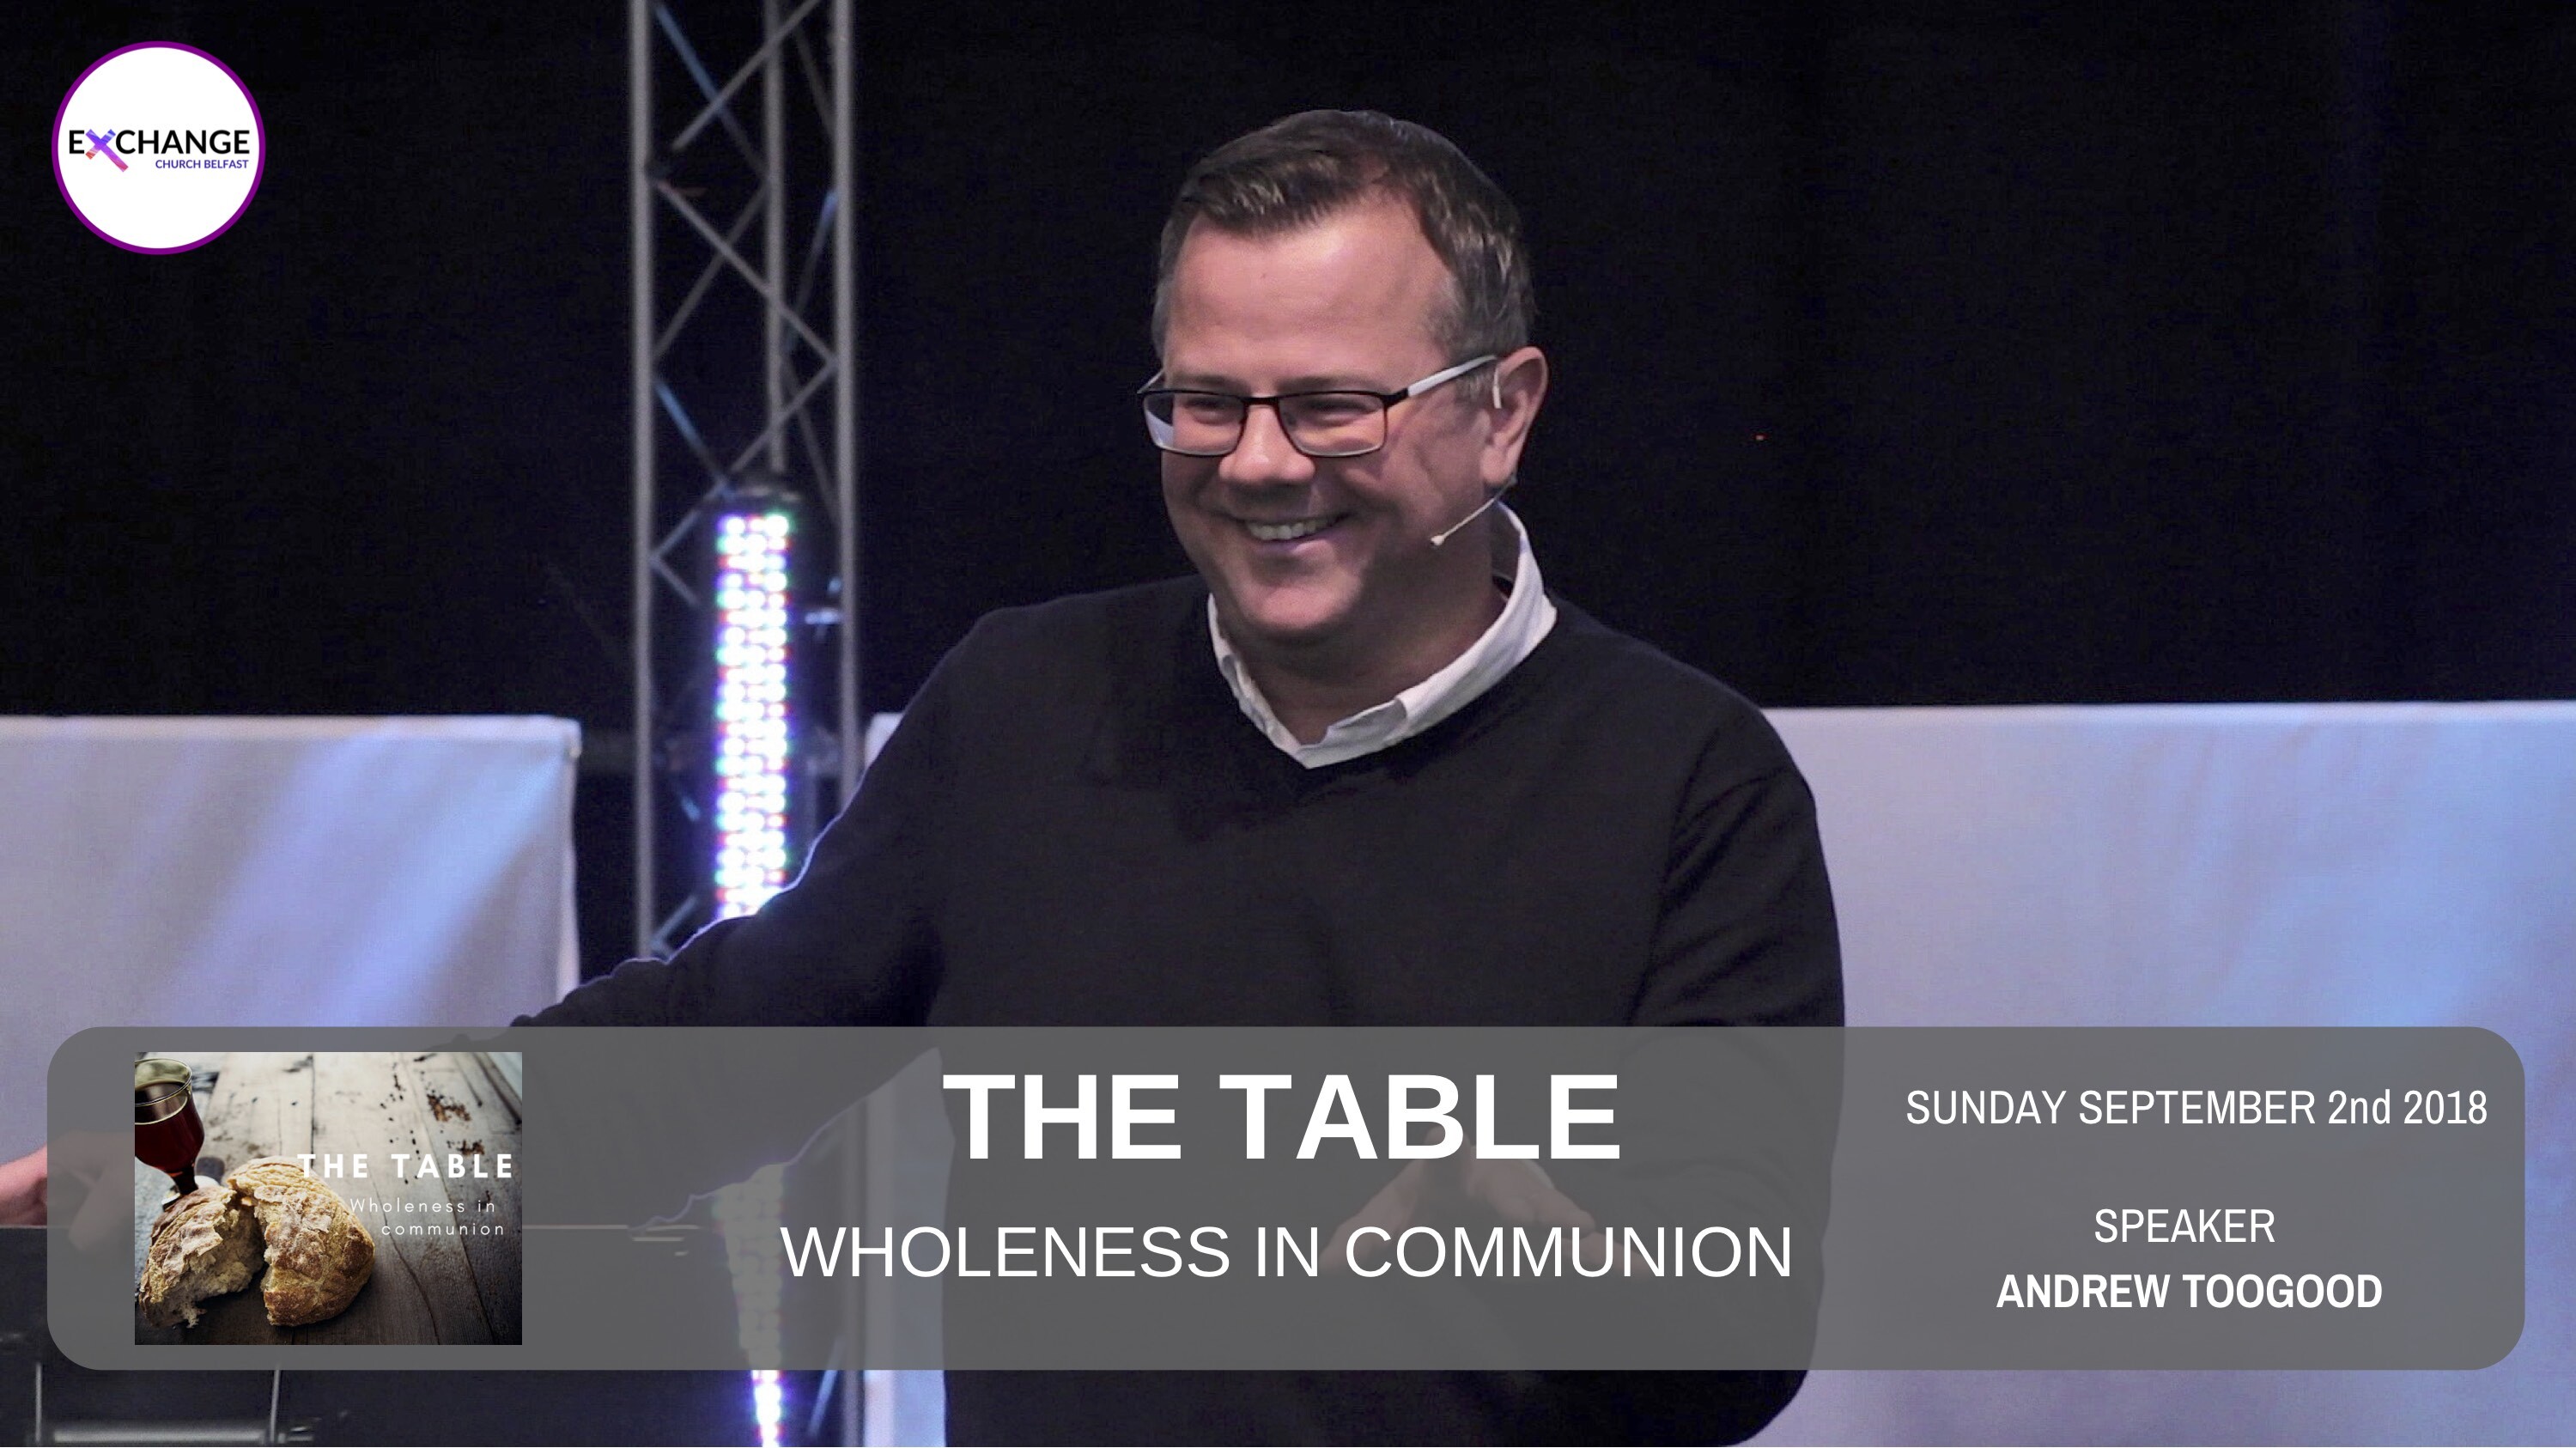 The Table - Wholeness in Communion